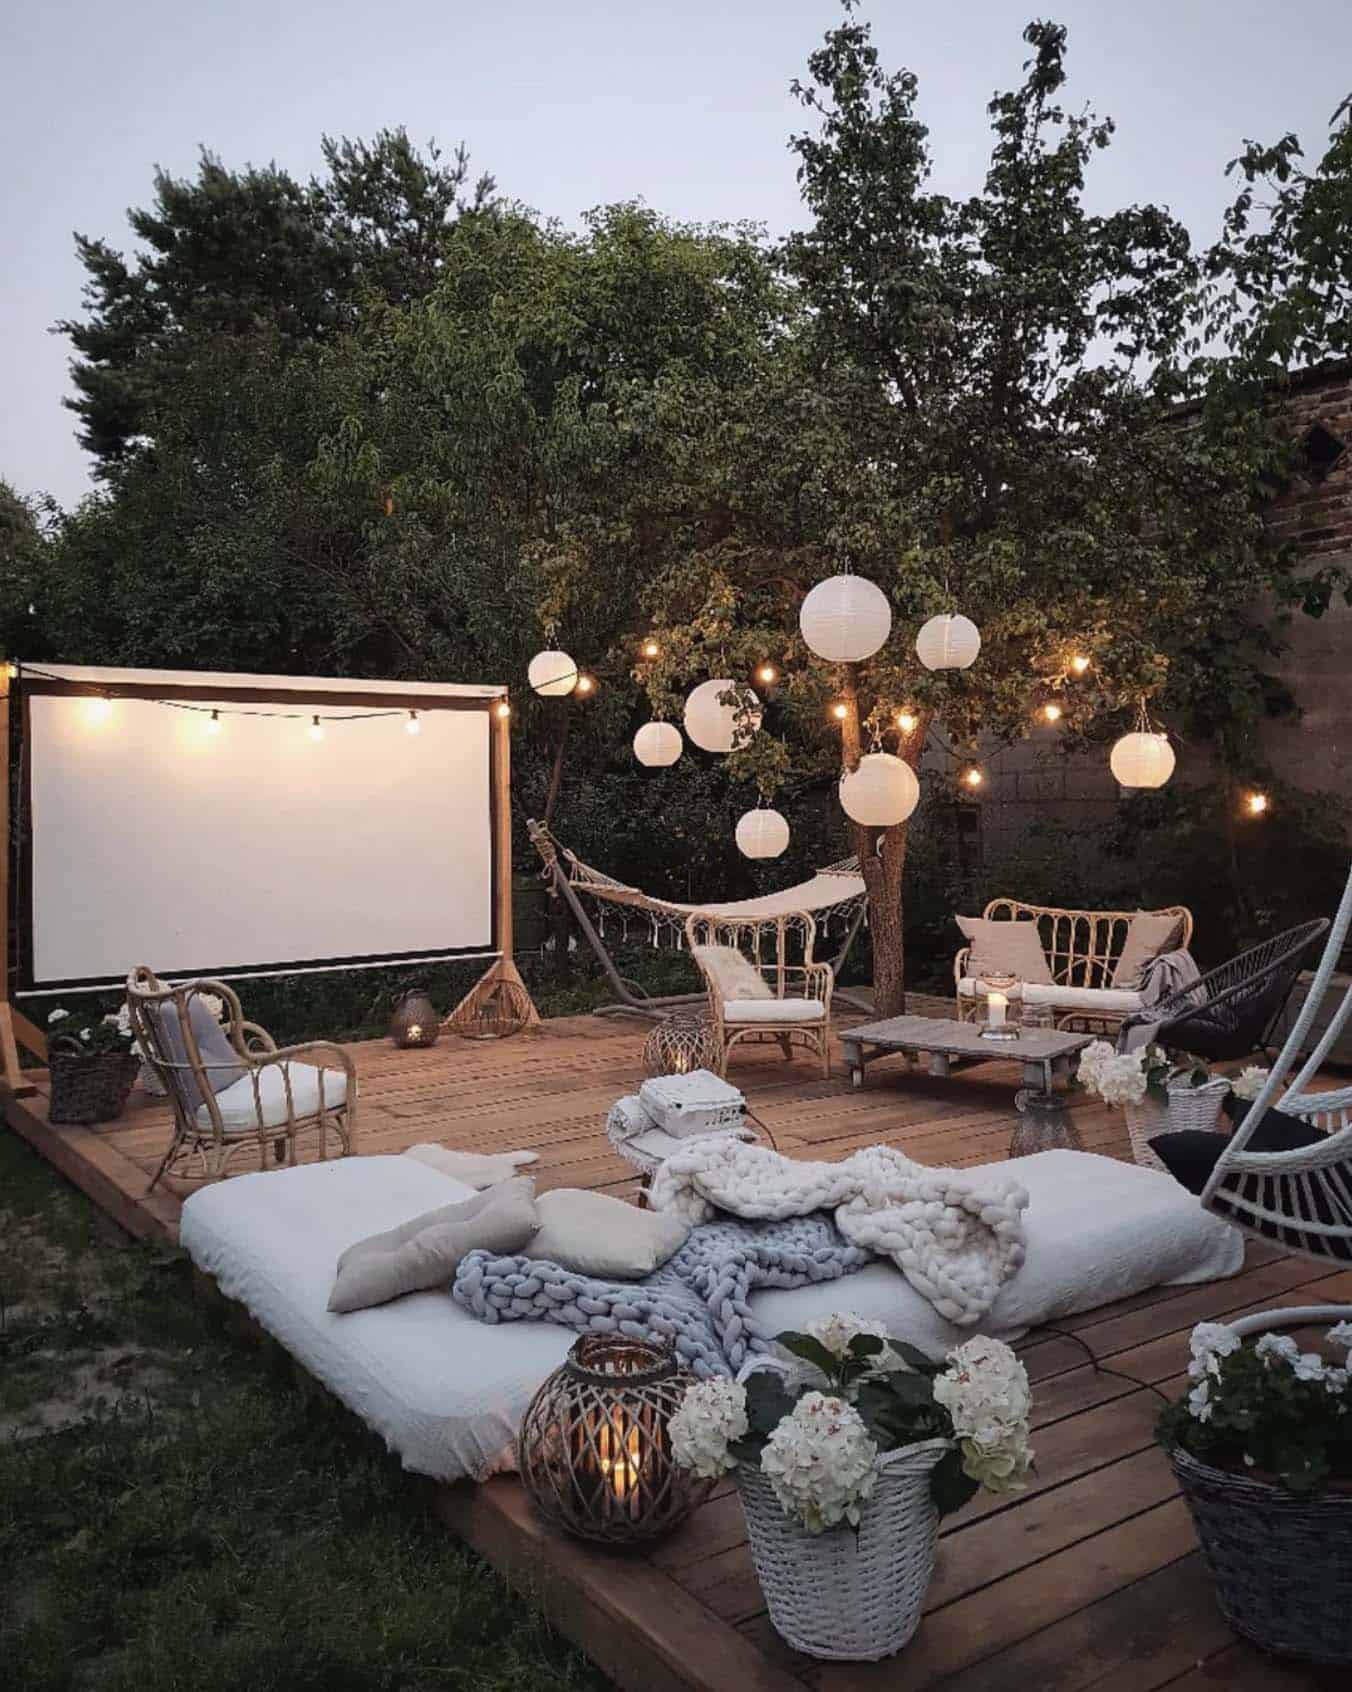 backyard terrace with string lights and a projector screen for outdoor movies